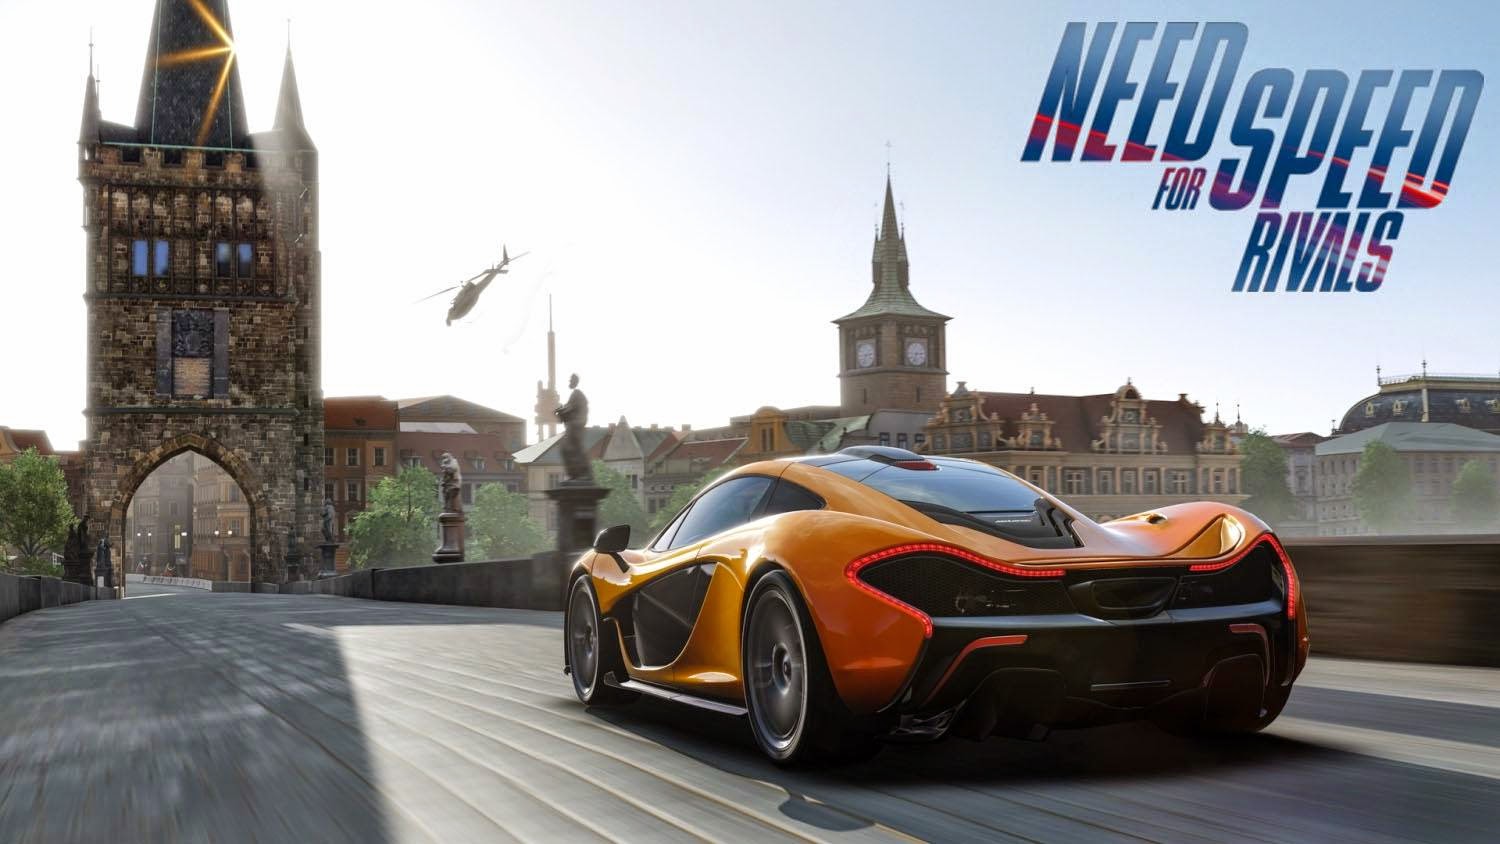 need_for_speed_(nfs)_rivals_full_pc_game_direct_download_free_single_link_iso